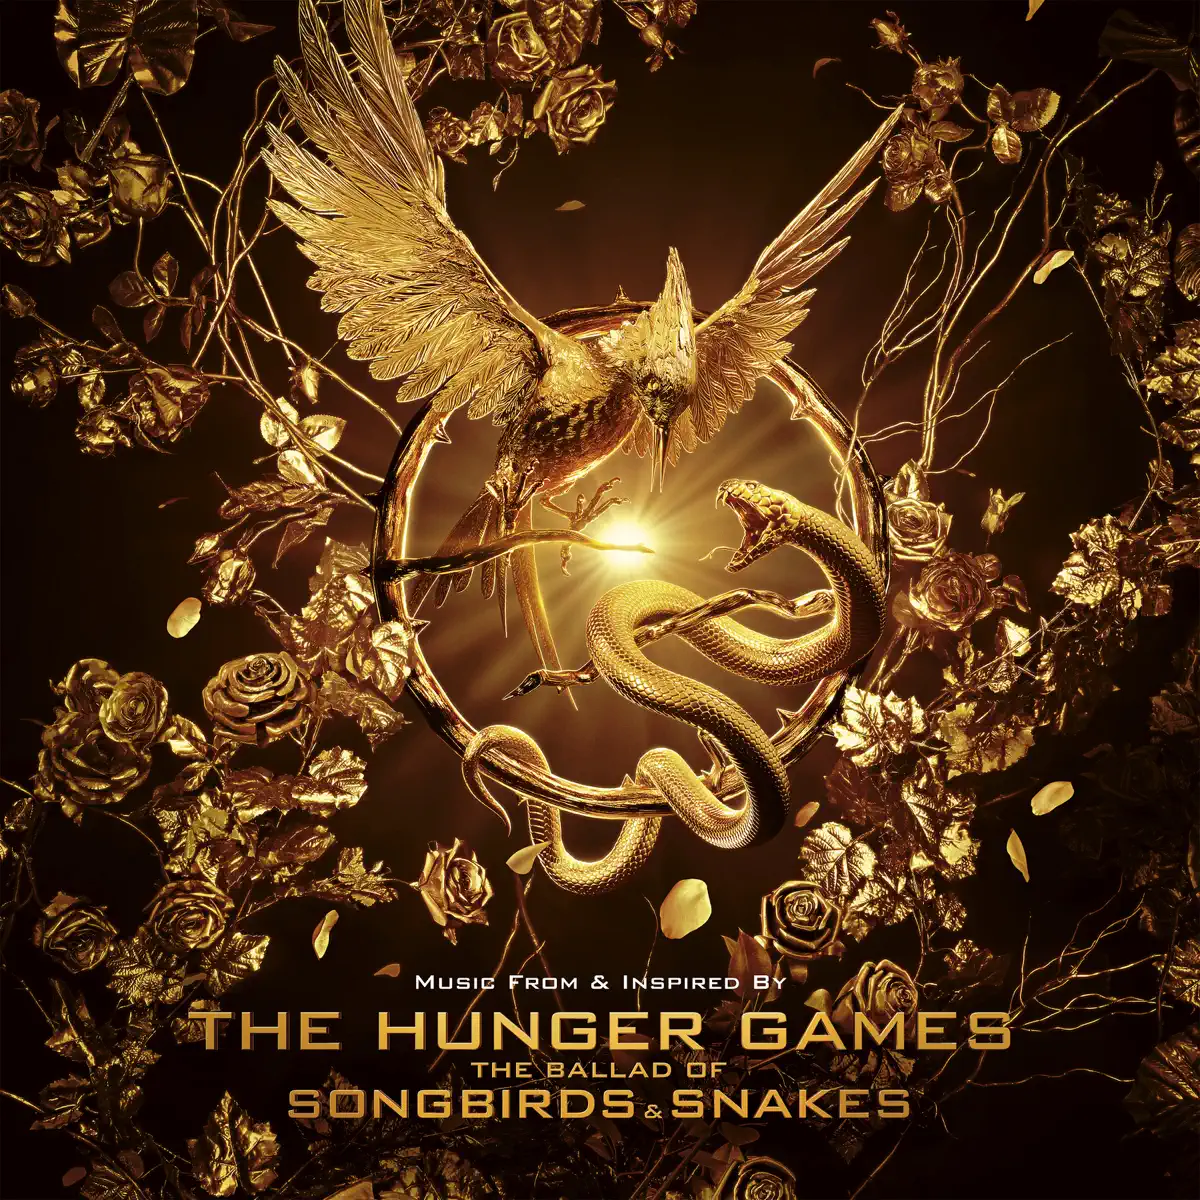 Olivia Rodrigo, Rachel Zegler & Flatland Cavalry - The Hunger Games The Ballad of Songbirds & Snakes (Music From & Inspired By) [pre-order] (2023) [iTunes Plus AAC M4A]-新房子